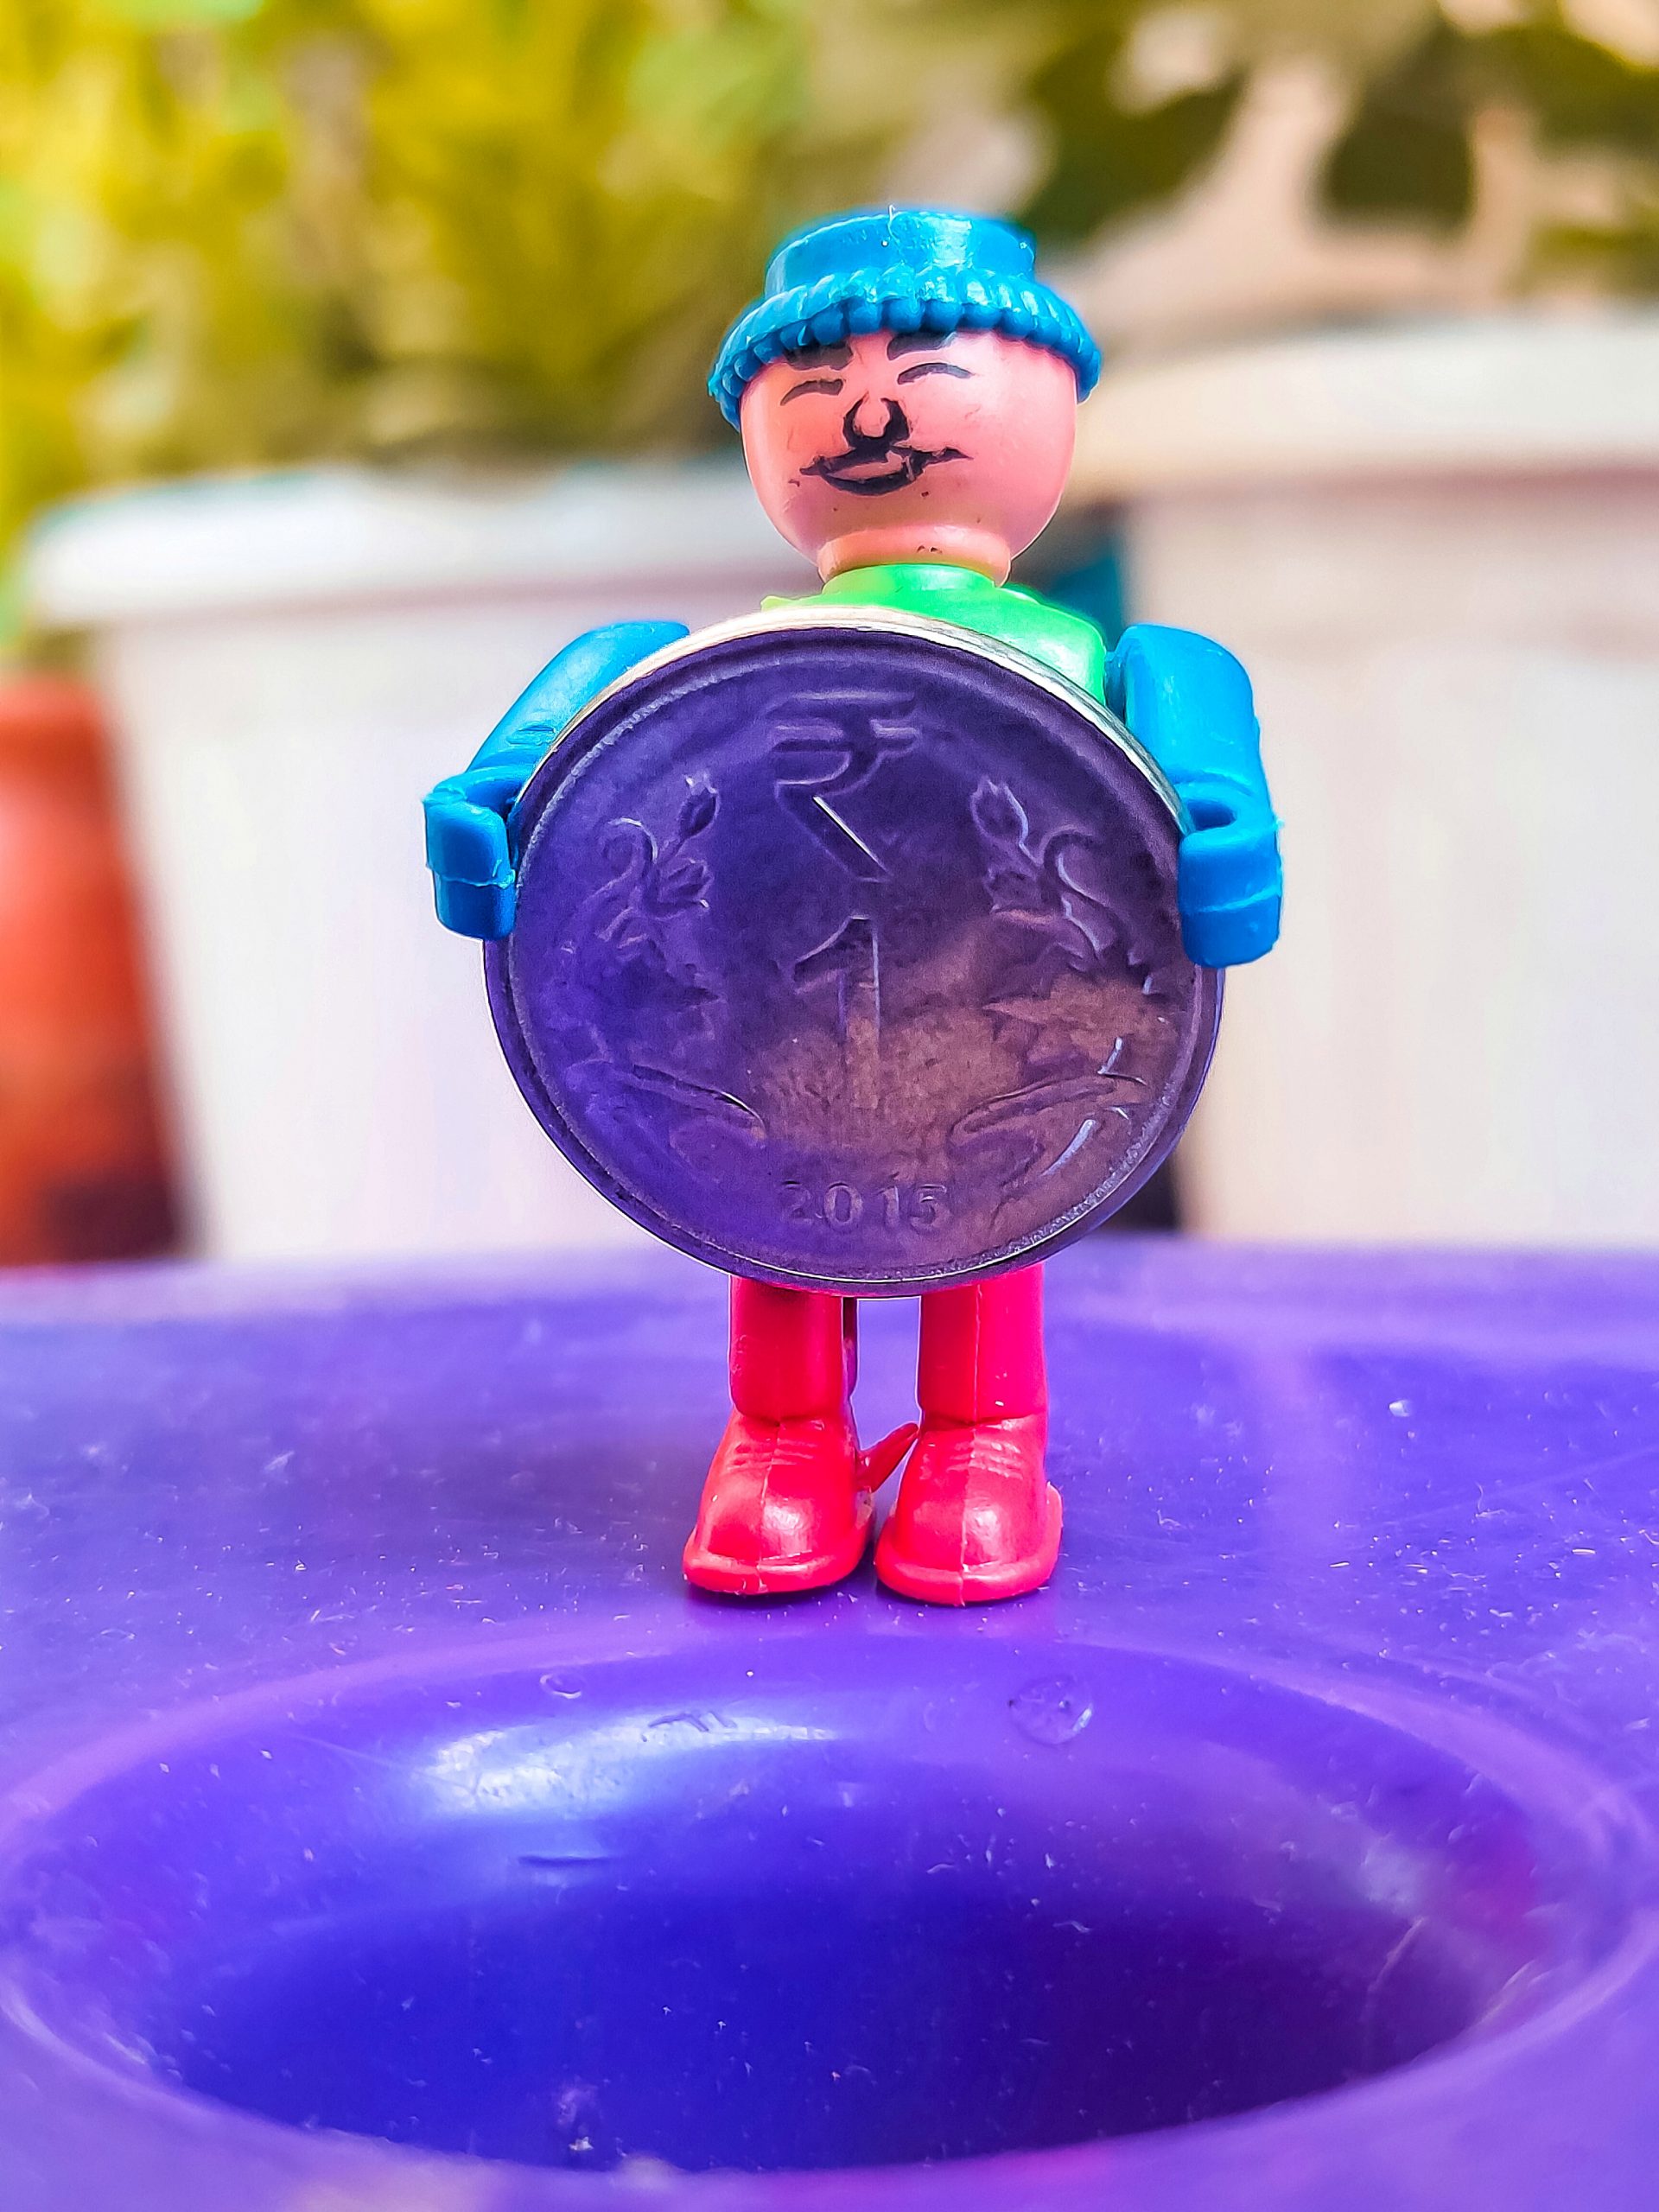 A toy with coin